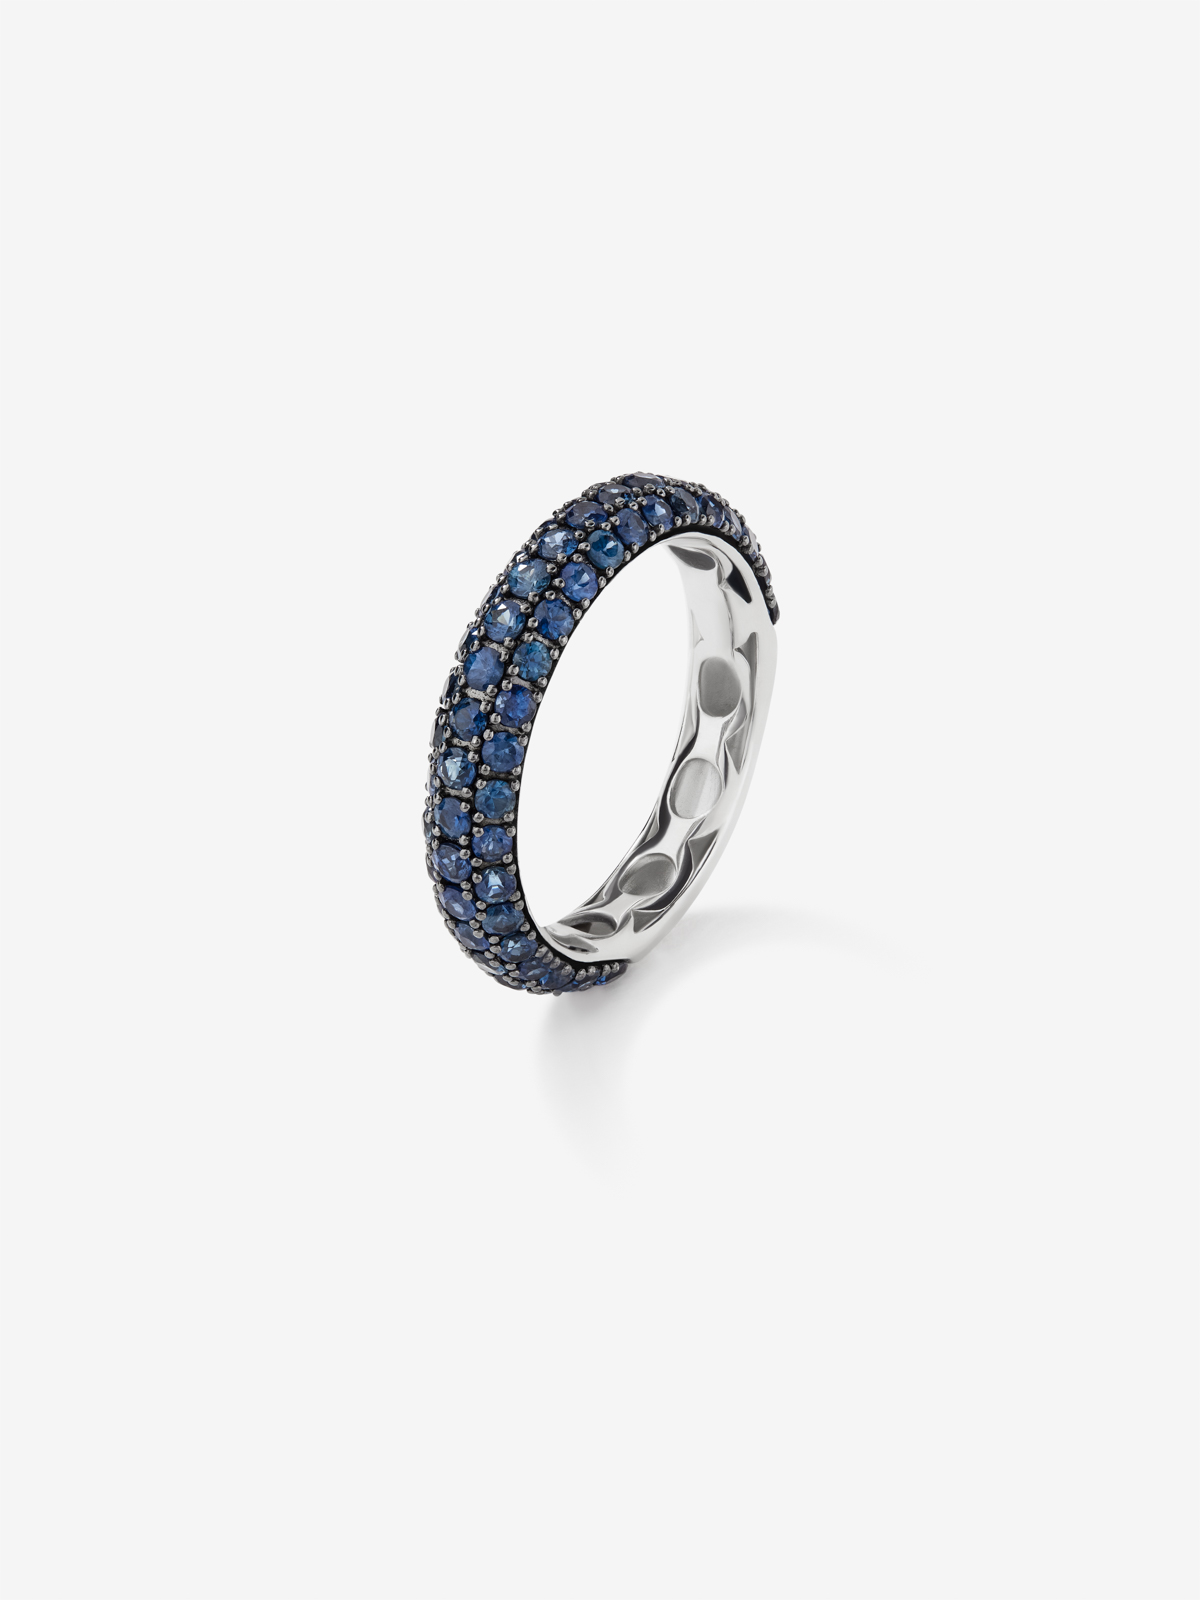 925 Silver ring band with sapphires